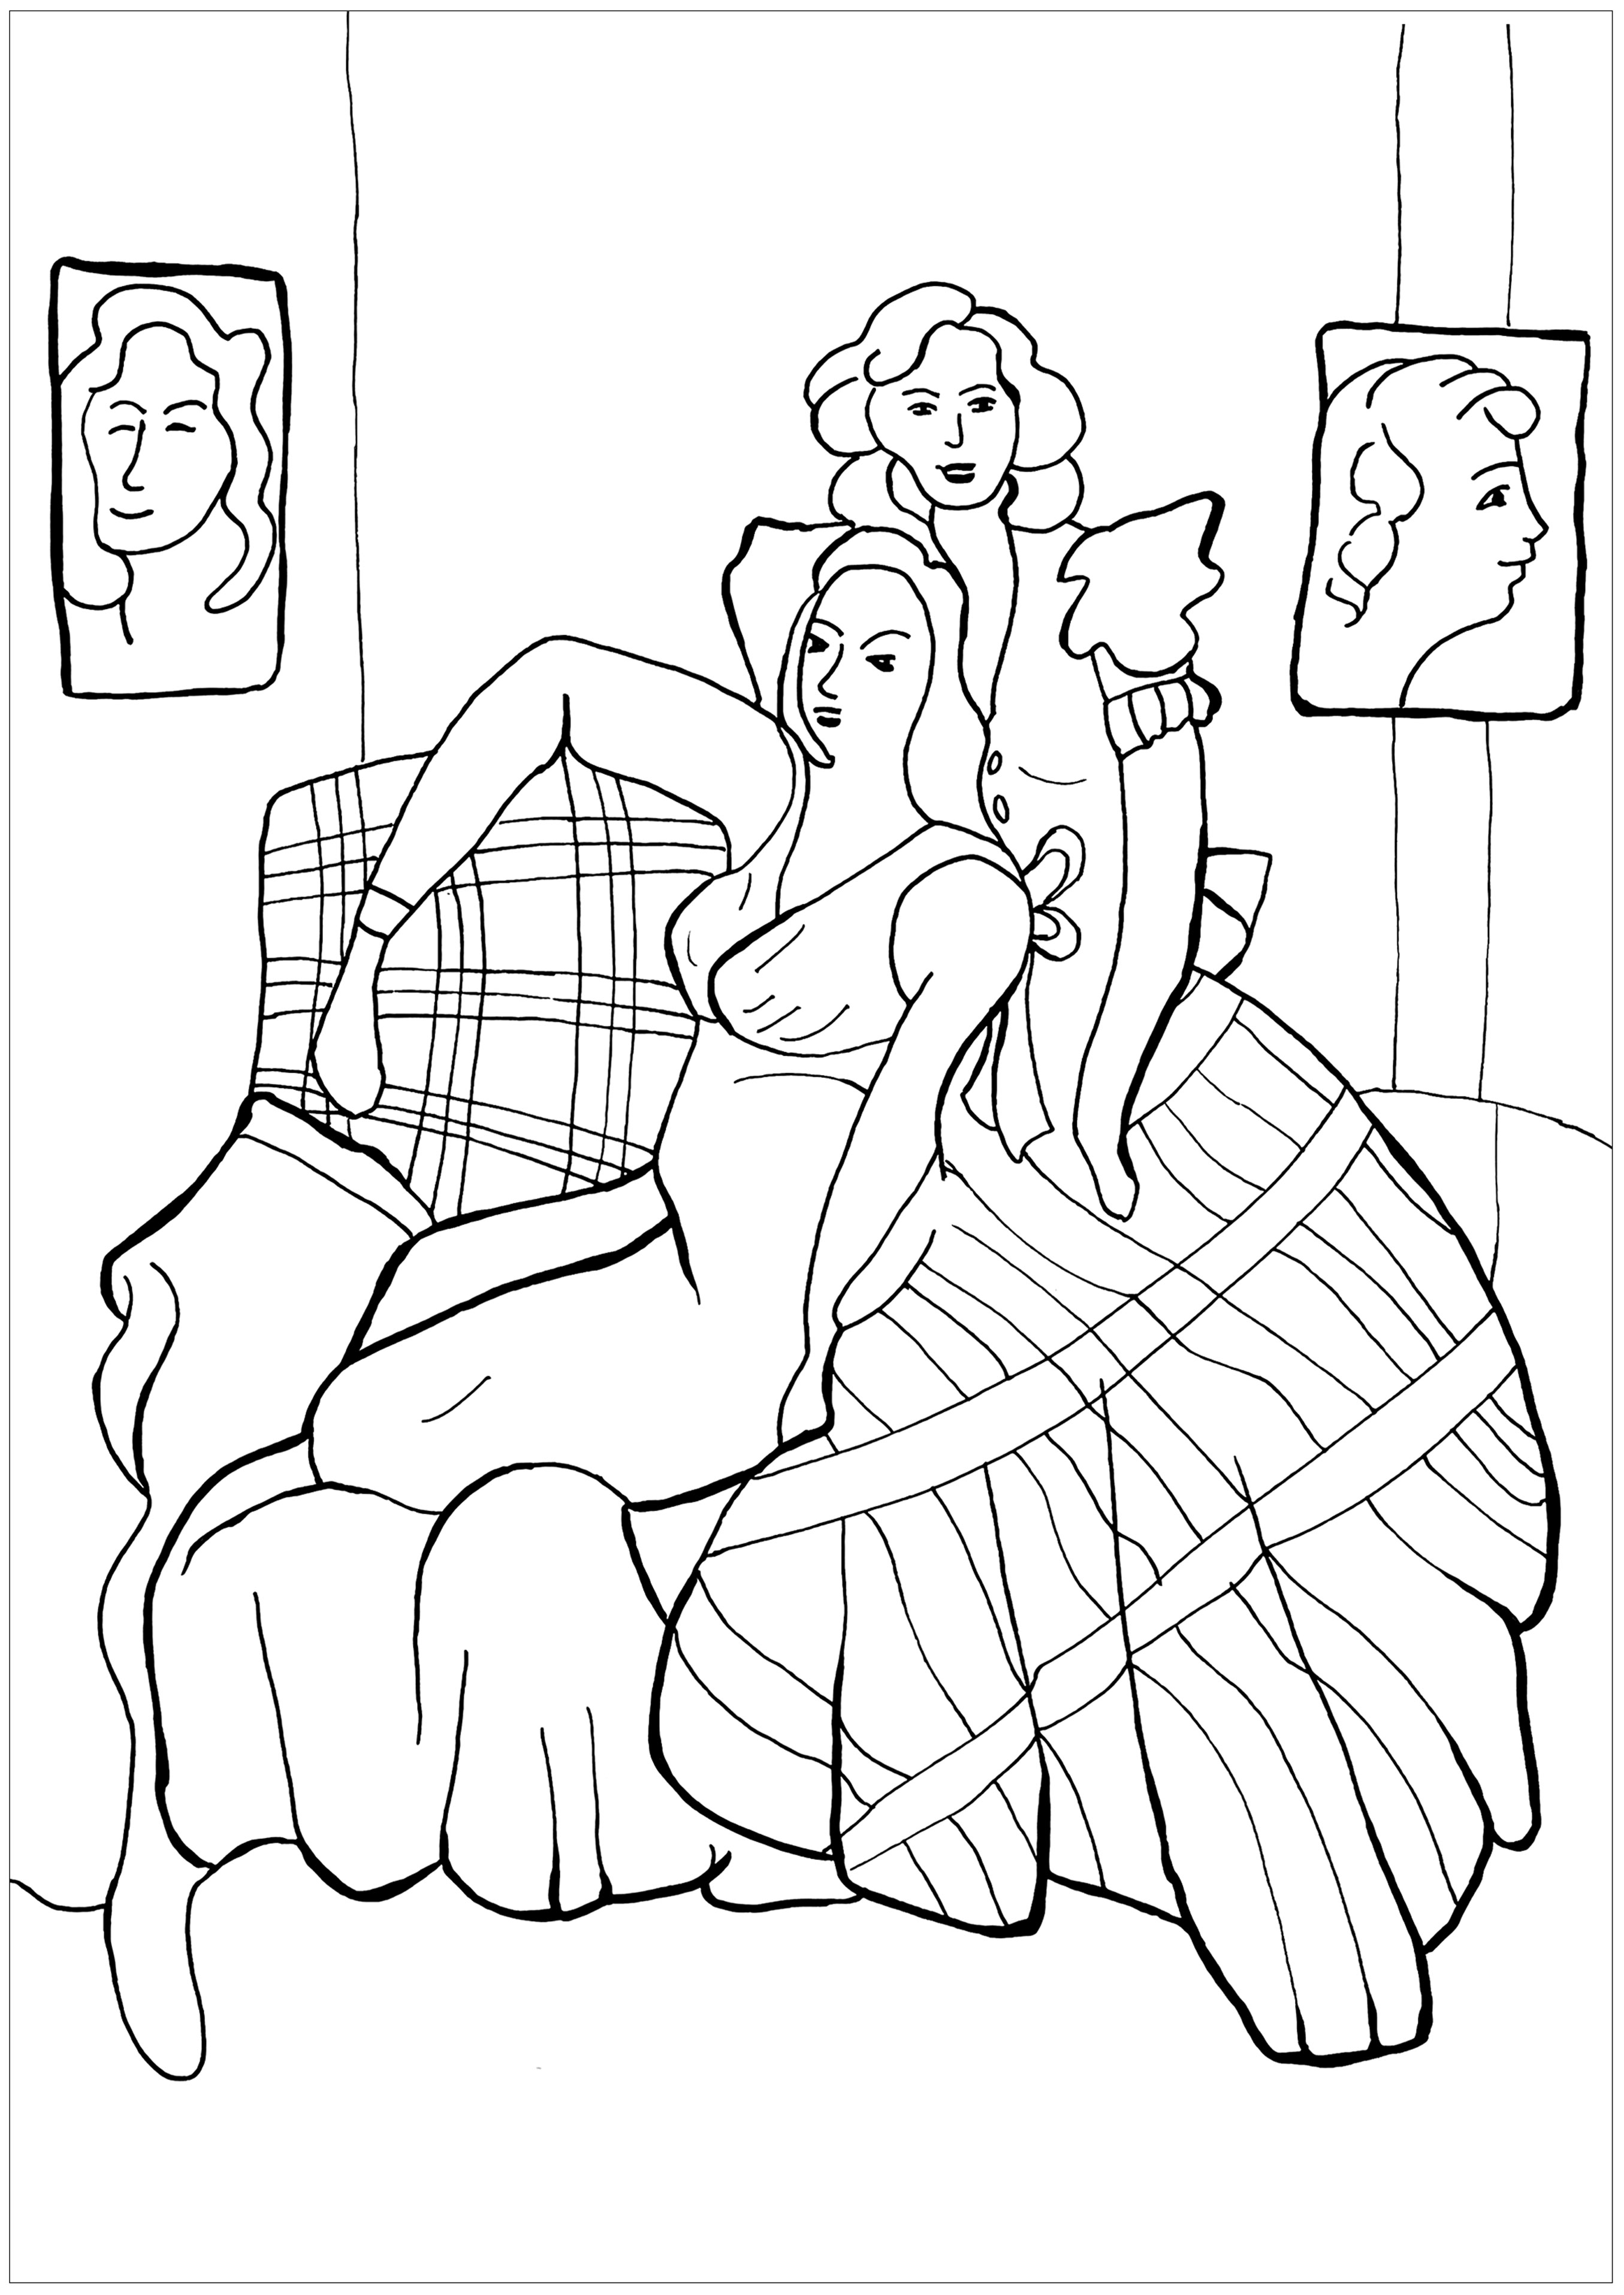 Coloring page created from Henri Matisse's painting 'Two Young Women, the Yellow Dress and the Scottish Dress' (1941).  Matisse is often regarded as the most important French painter of the 20th century. As a master of supreme decoration and expressive use of color, his visionary experiments into different styles of painting from his impressionistic domestic and figurative subjects to his abstract cut-outs changed our perception of the world.